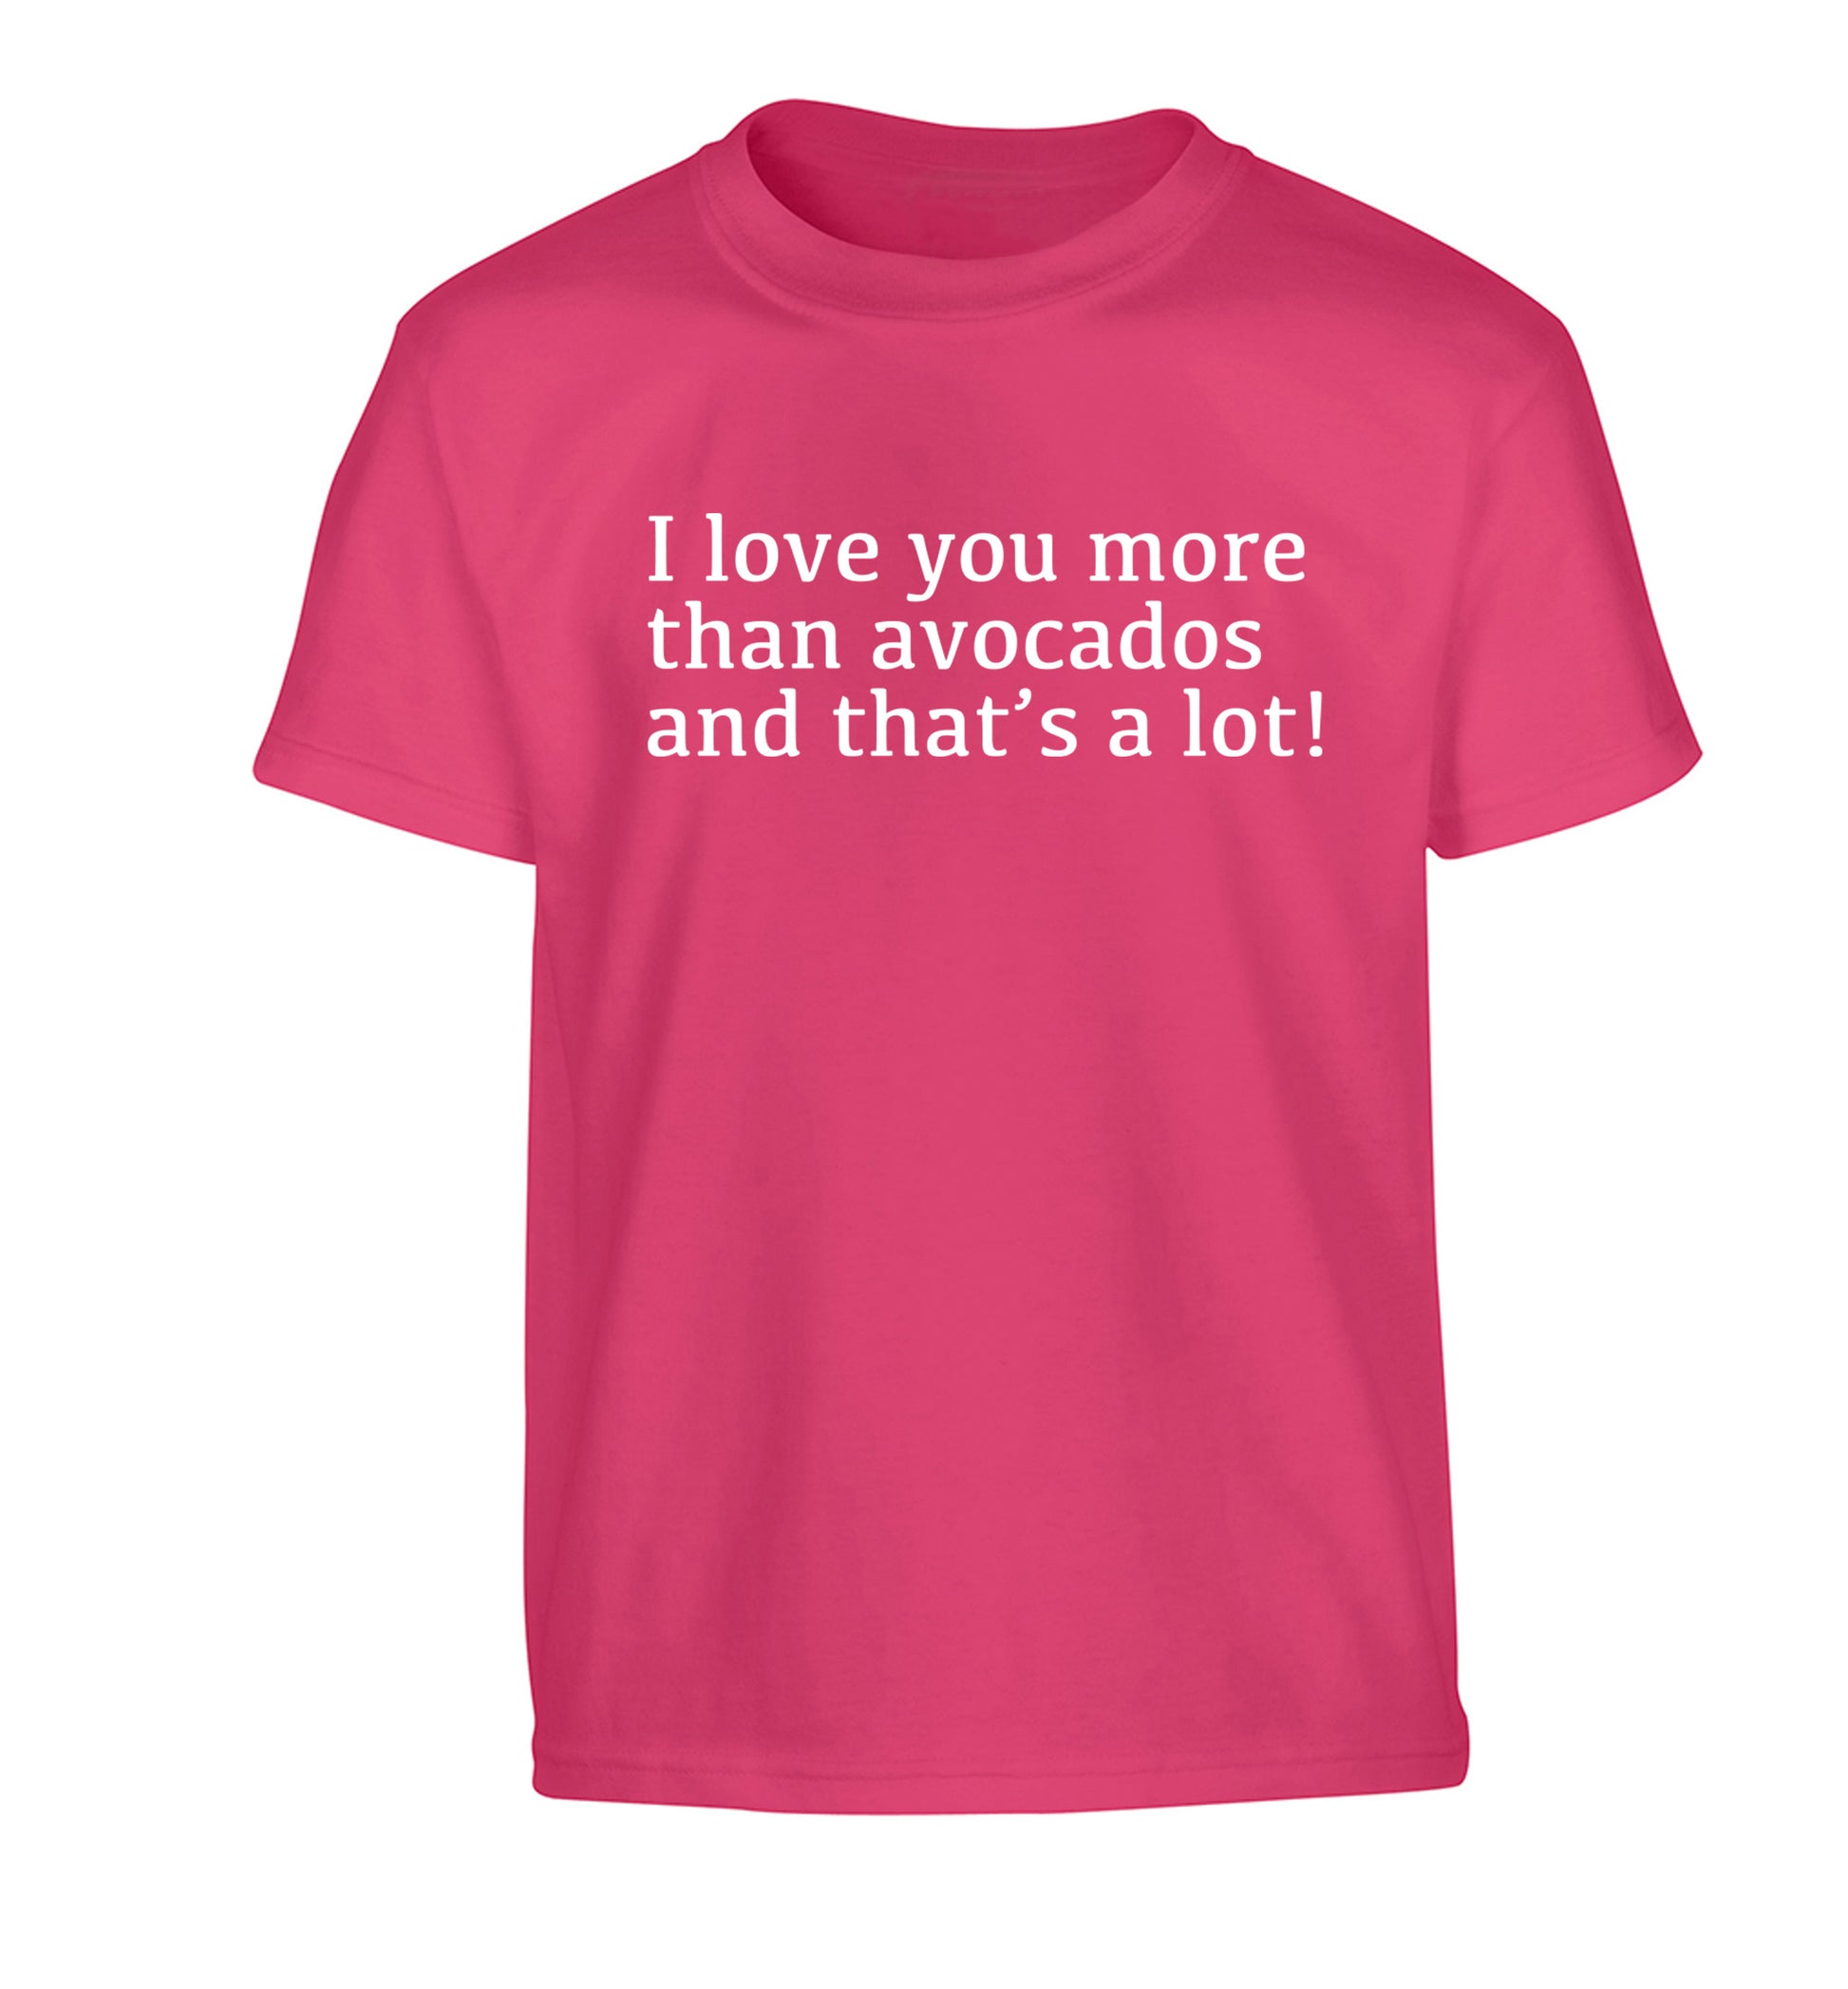 I love you more than avocados and that's a lot Children's pink Tshirt 12-14 Years